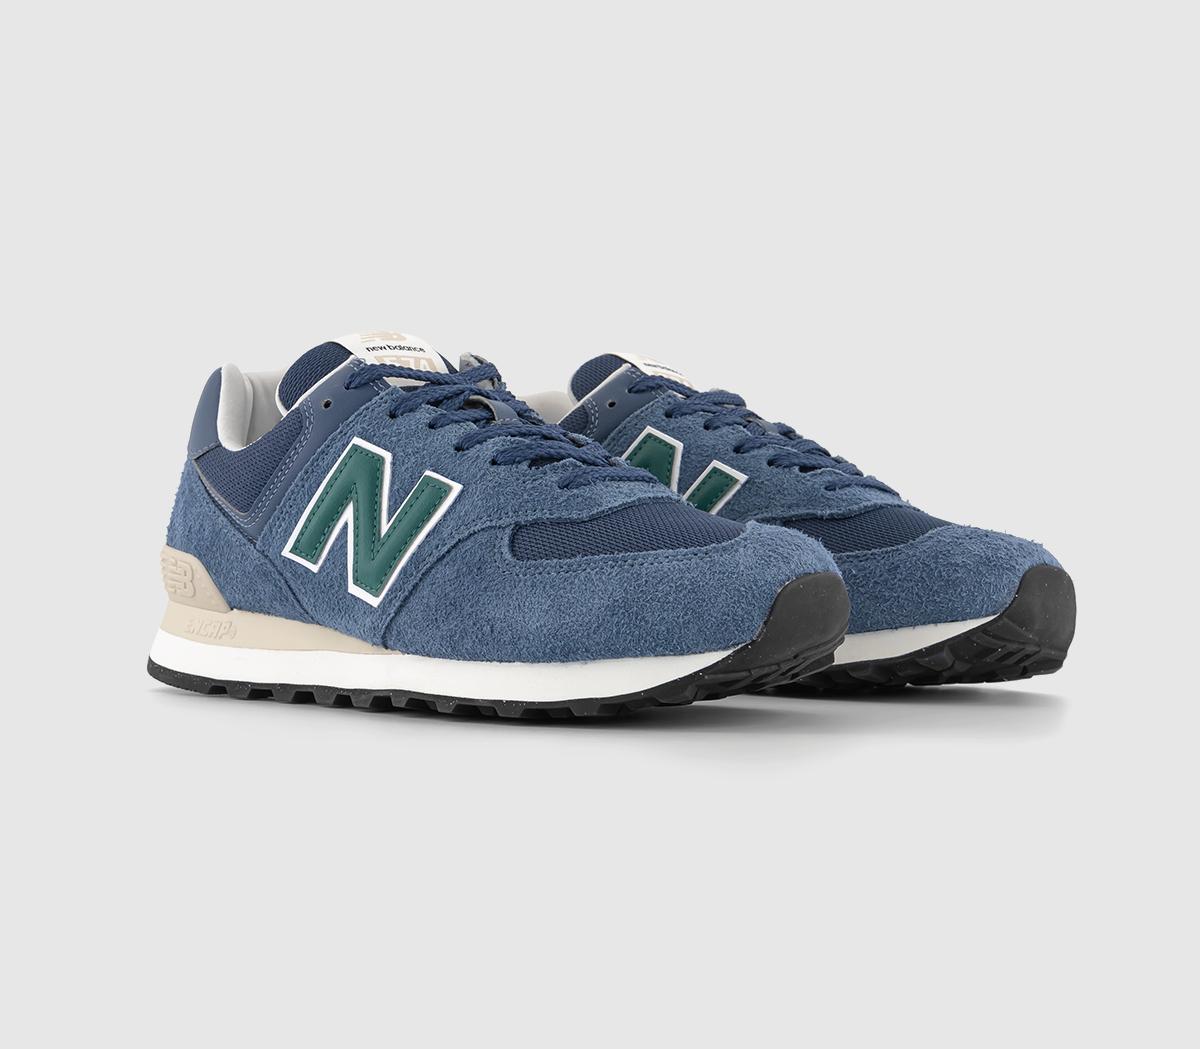 New Balance 574 Trainers Blue Navy Green, 9